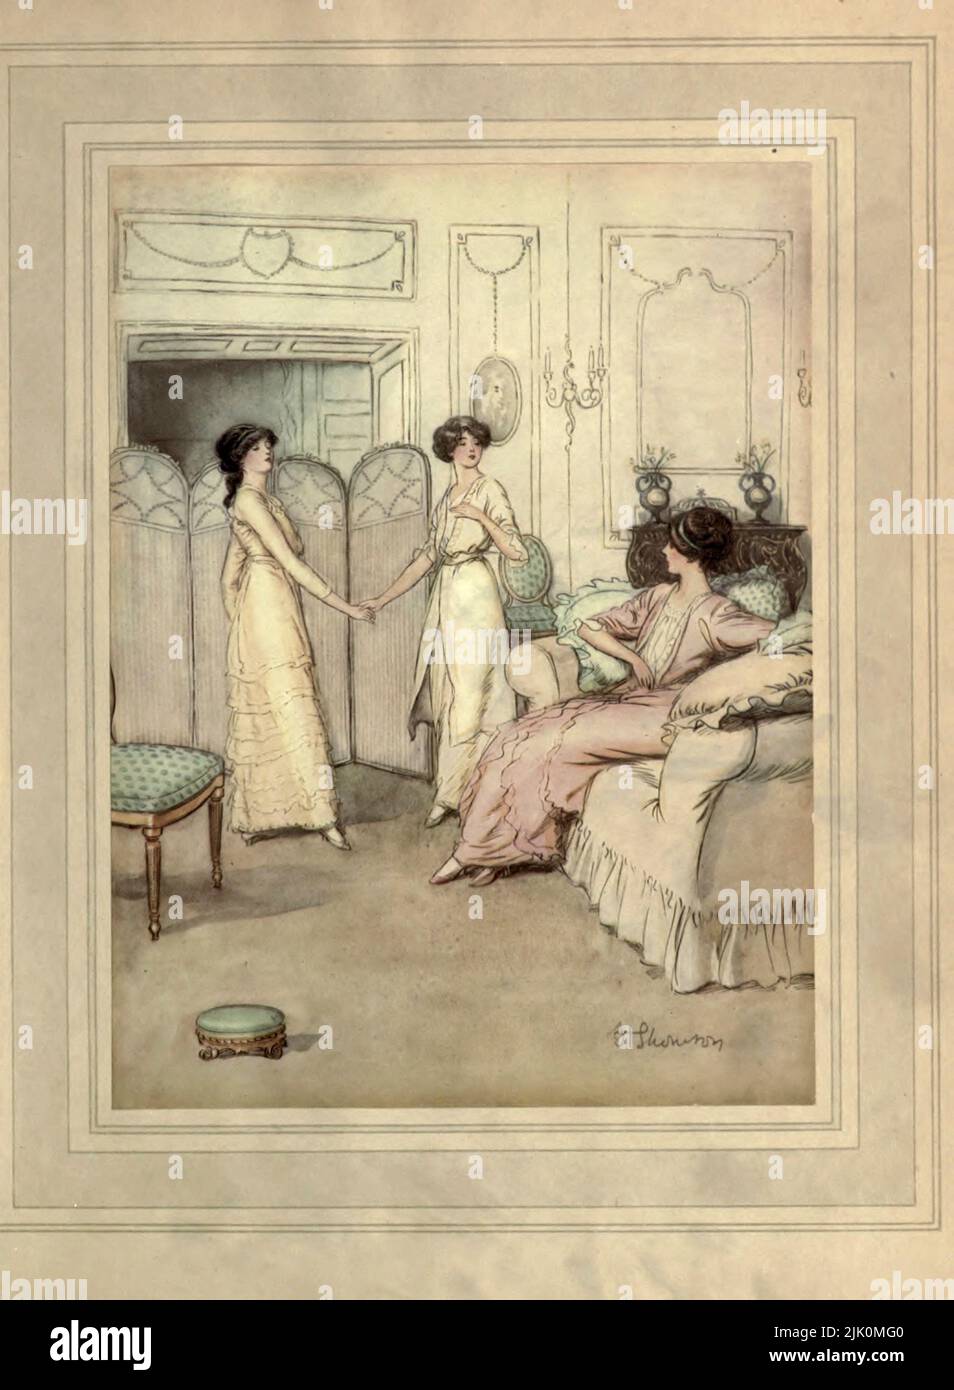 Catherine: 'Mary, you toad' (Act I at Loam House, Mayfair) The Admirable Crichton is a comic stage play written in 1902 by J. M. Barrie. Illustrated by Hugh Thomson RI (1 June 1860 – 7 May 1920) was an Irish Illustrator born at Coleraine near Derry. He is best known for his pen-and-ink illustrations of works by authors such as Jane Austen, Charles Dickens, and J. M. Barrie. Stock Photo